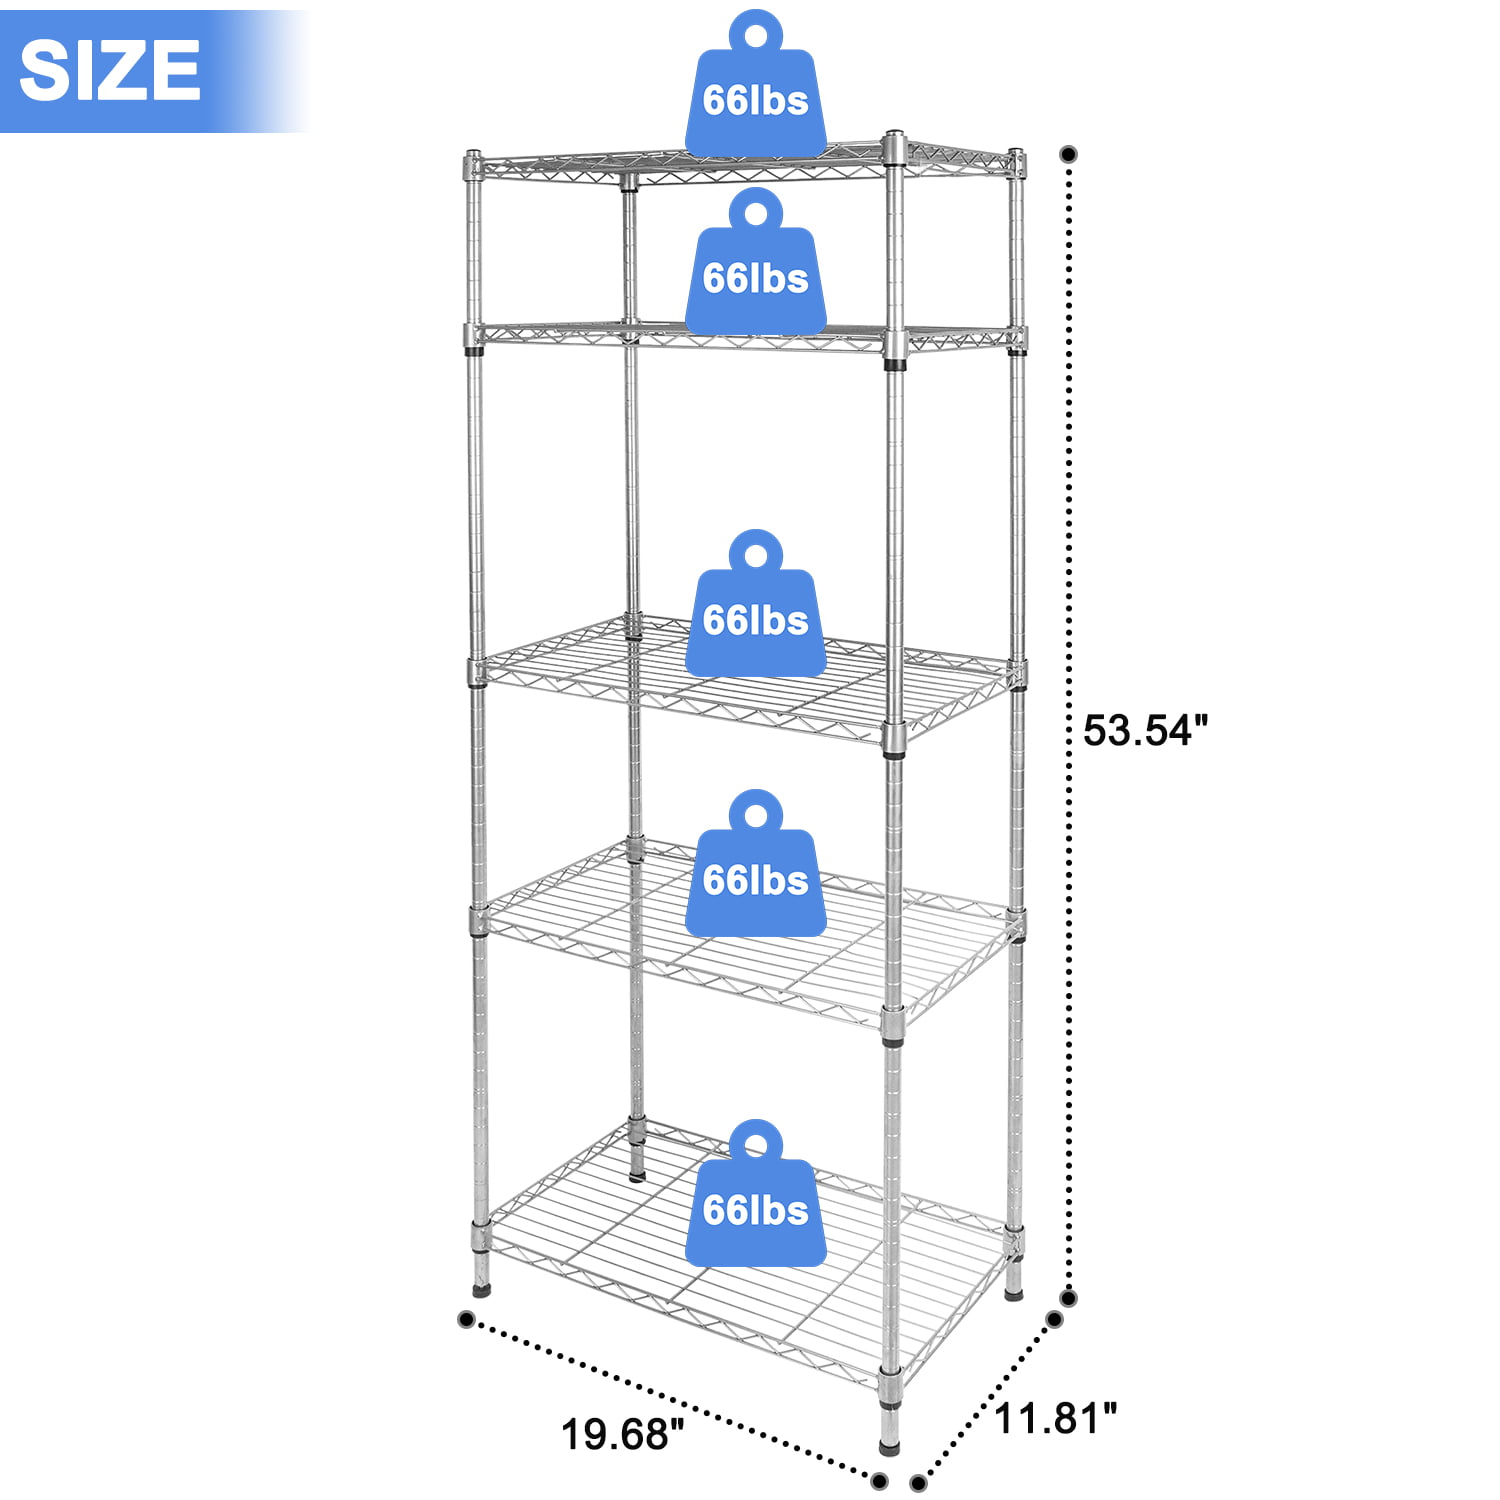 Silver Metal Shelving Unit, UHOMEPRO 5-Tier Heavy Duty Height Adjustable Kitchen  Storage Shelves, Wire Shelving With Wheel, Wire Storage Racks for Garage  Office kitchen, 35L x 14W x 65H, W1269 